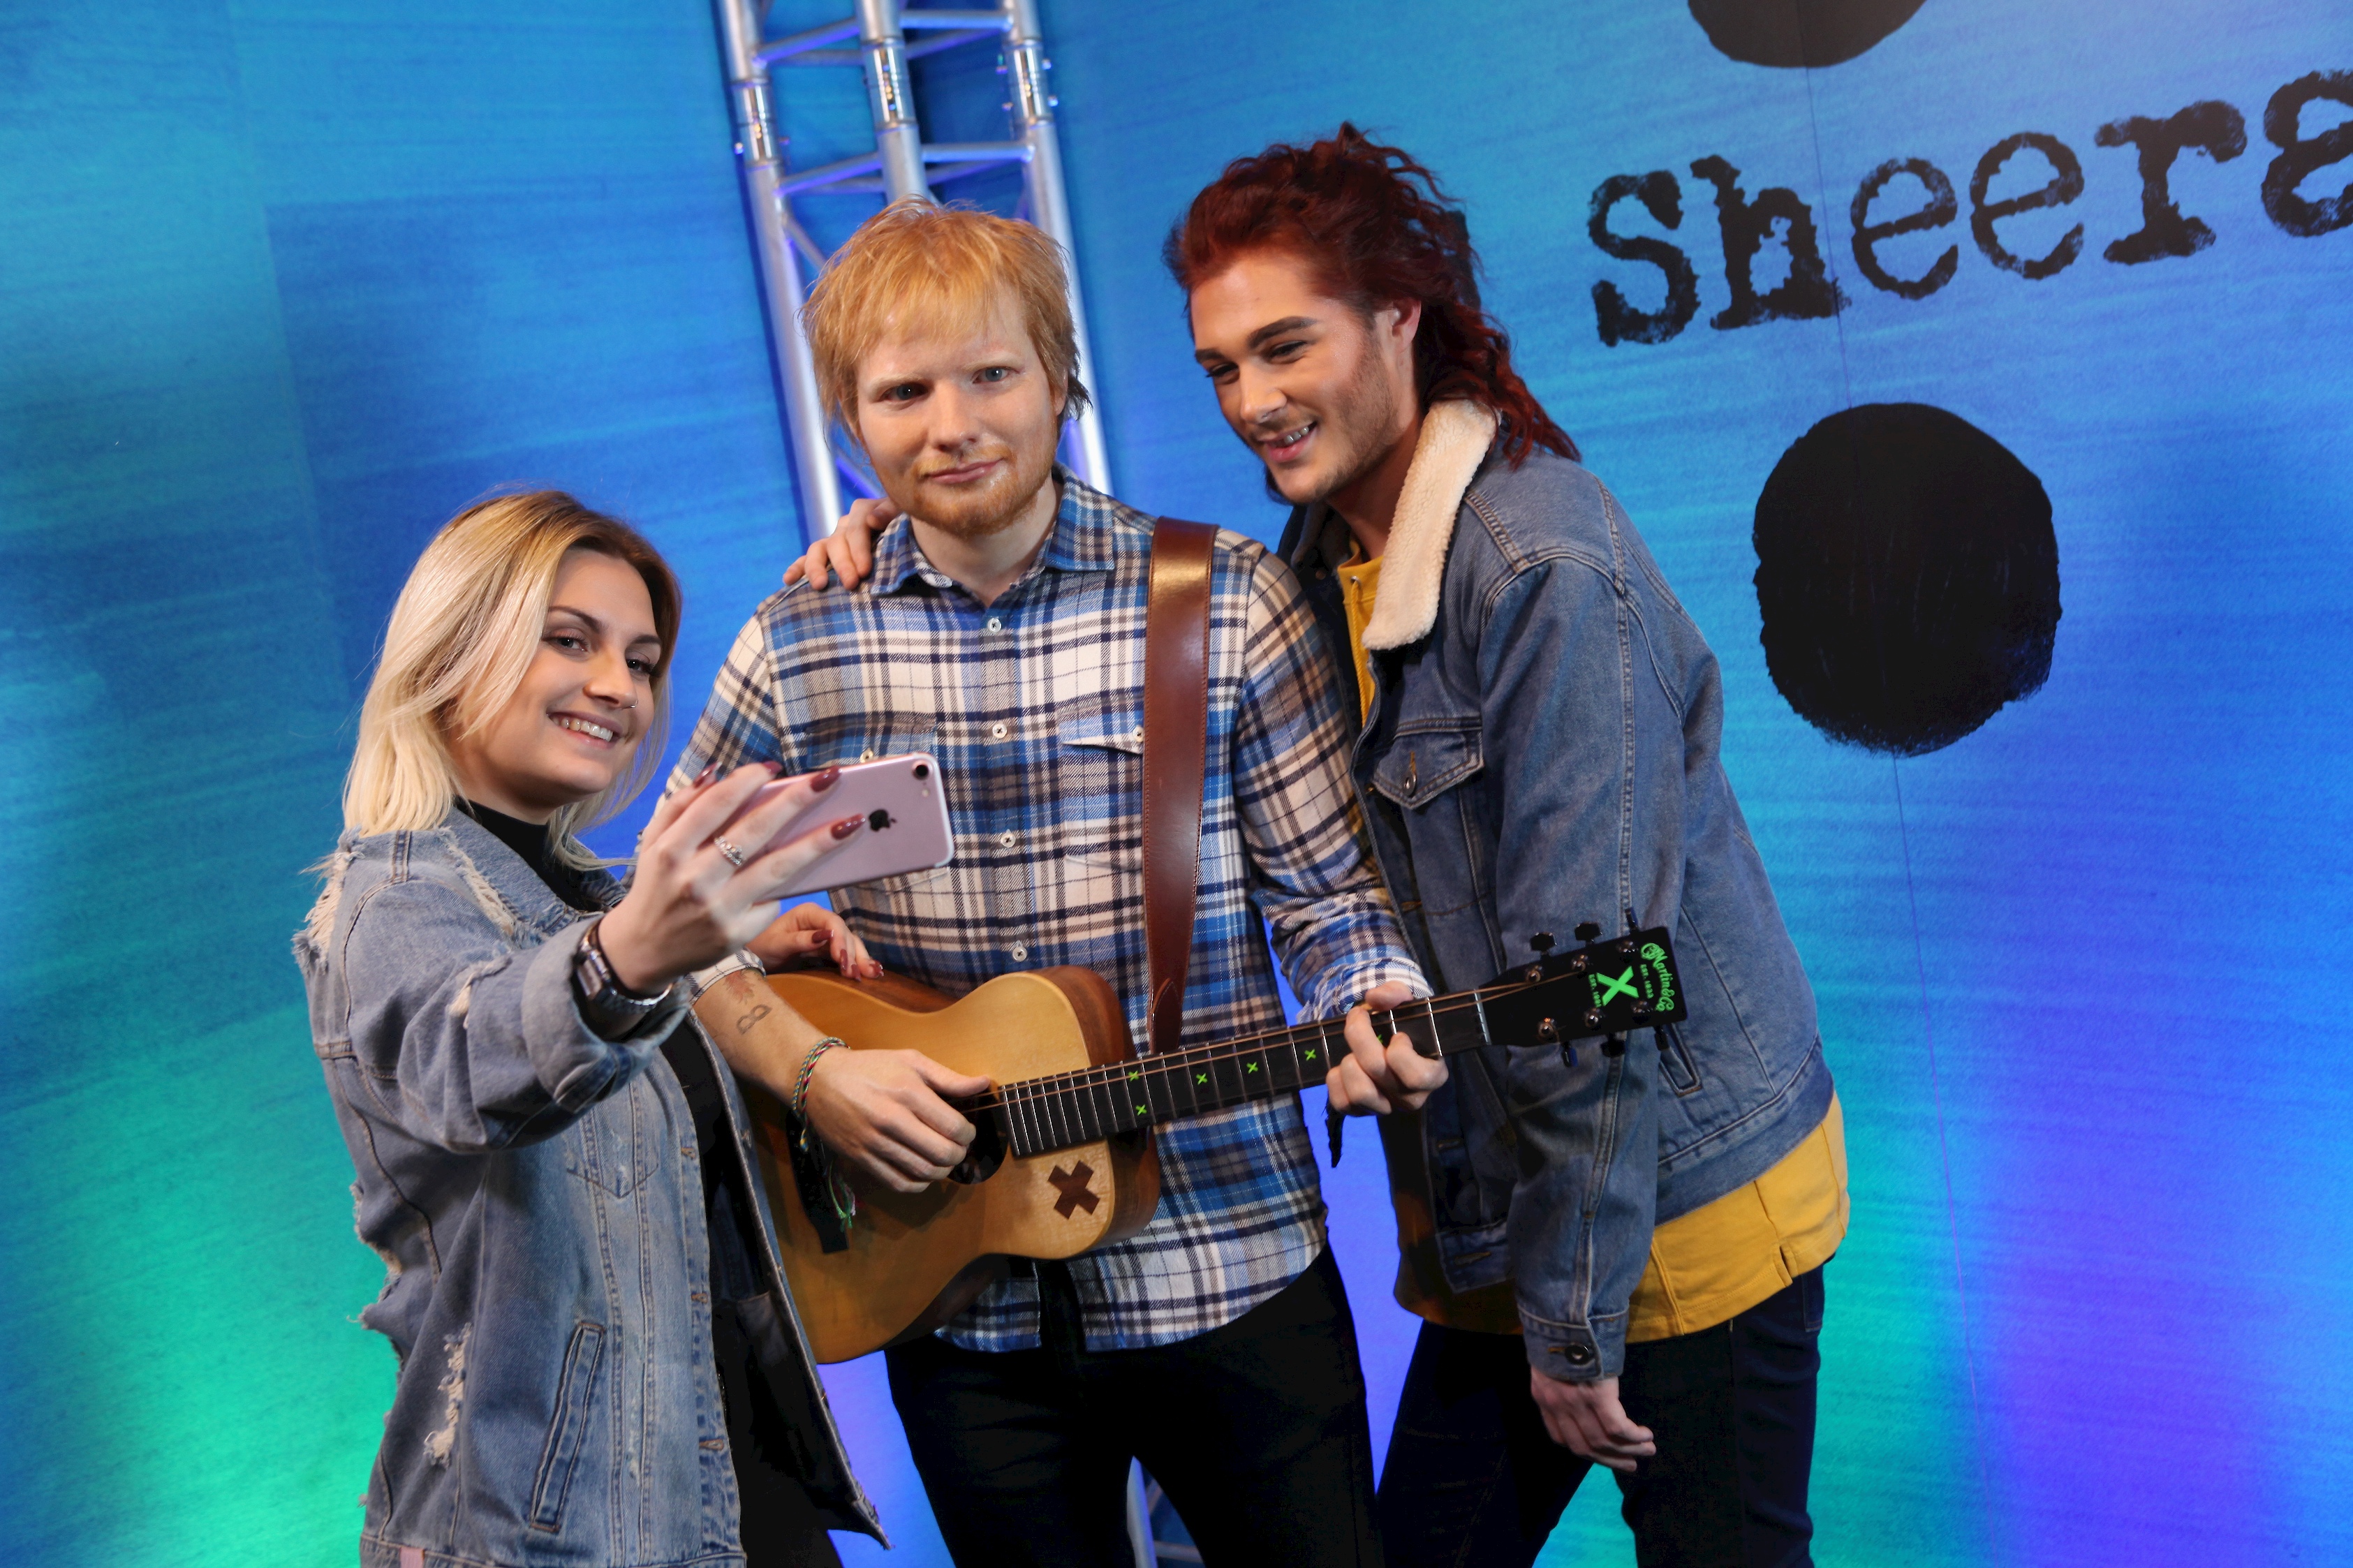 Guests taking a selfie with Ed Sheeran's wax figure at Madame Tussauds Blackpool